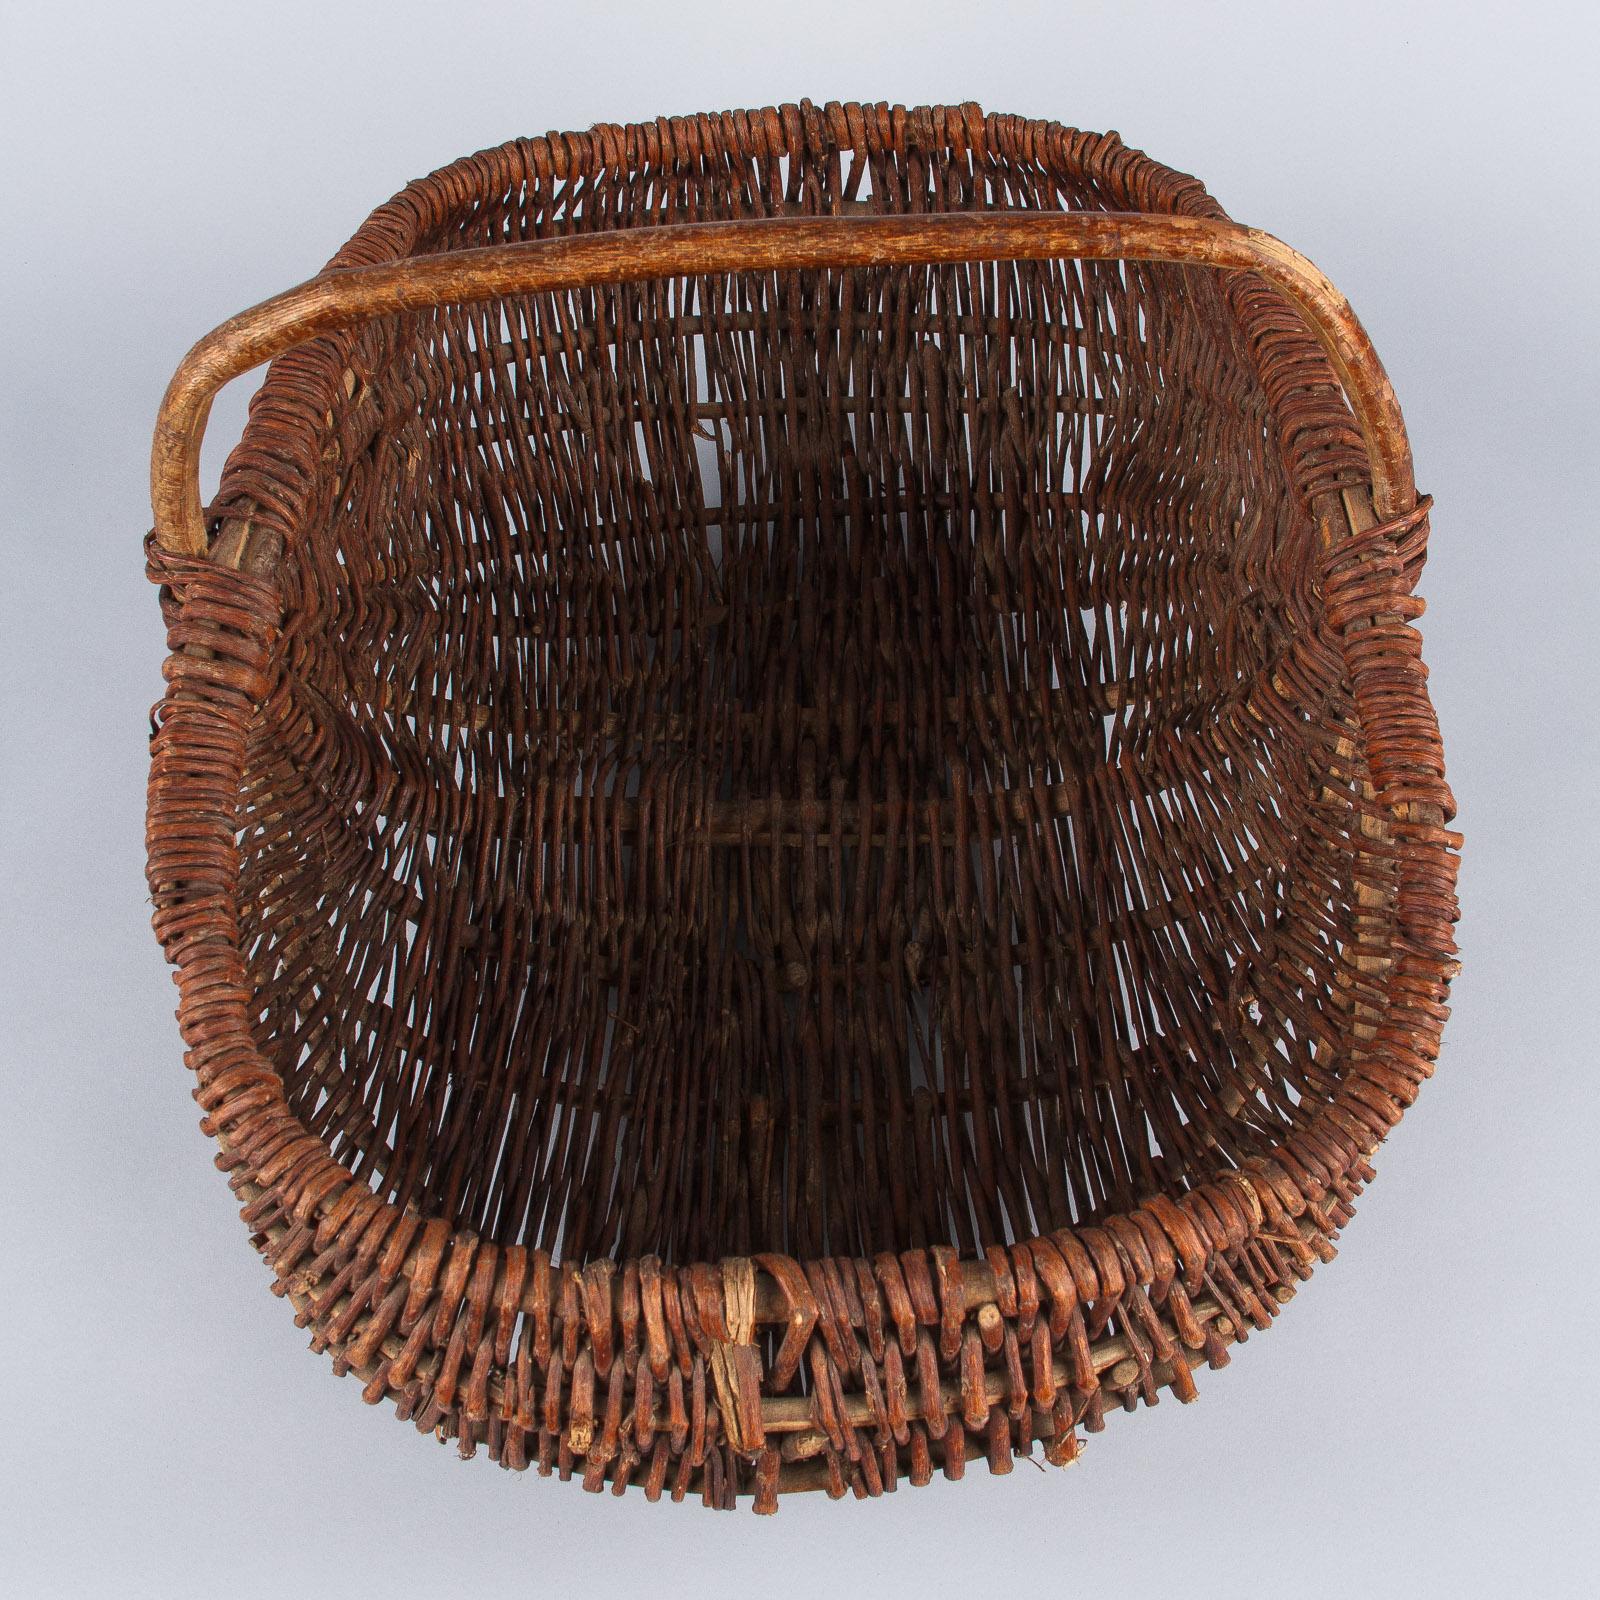 French Provincial French Wicker Basket from Auvergne Region